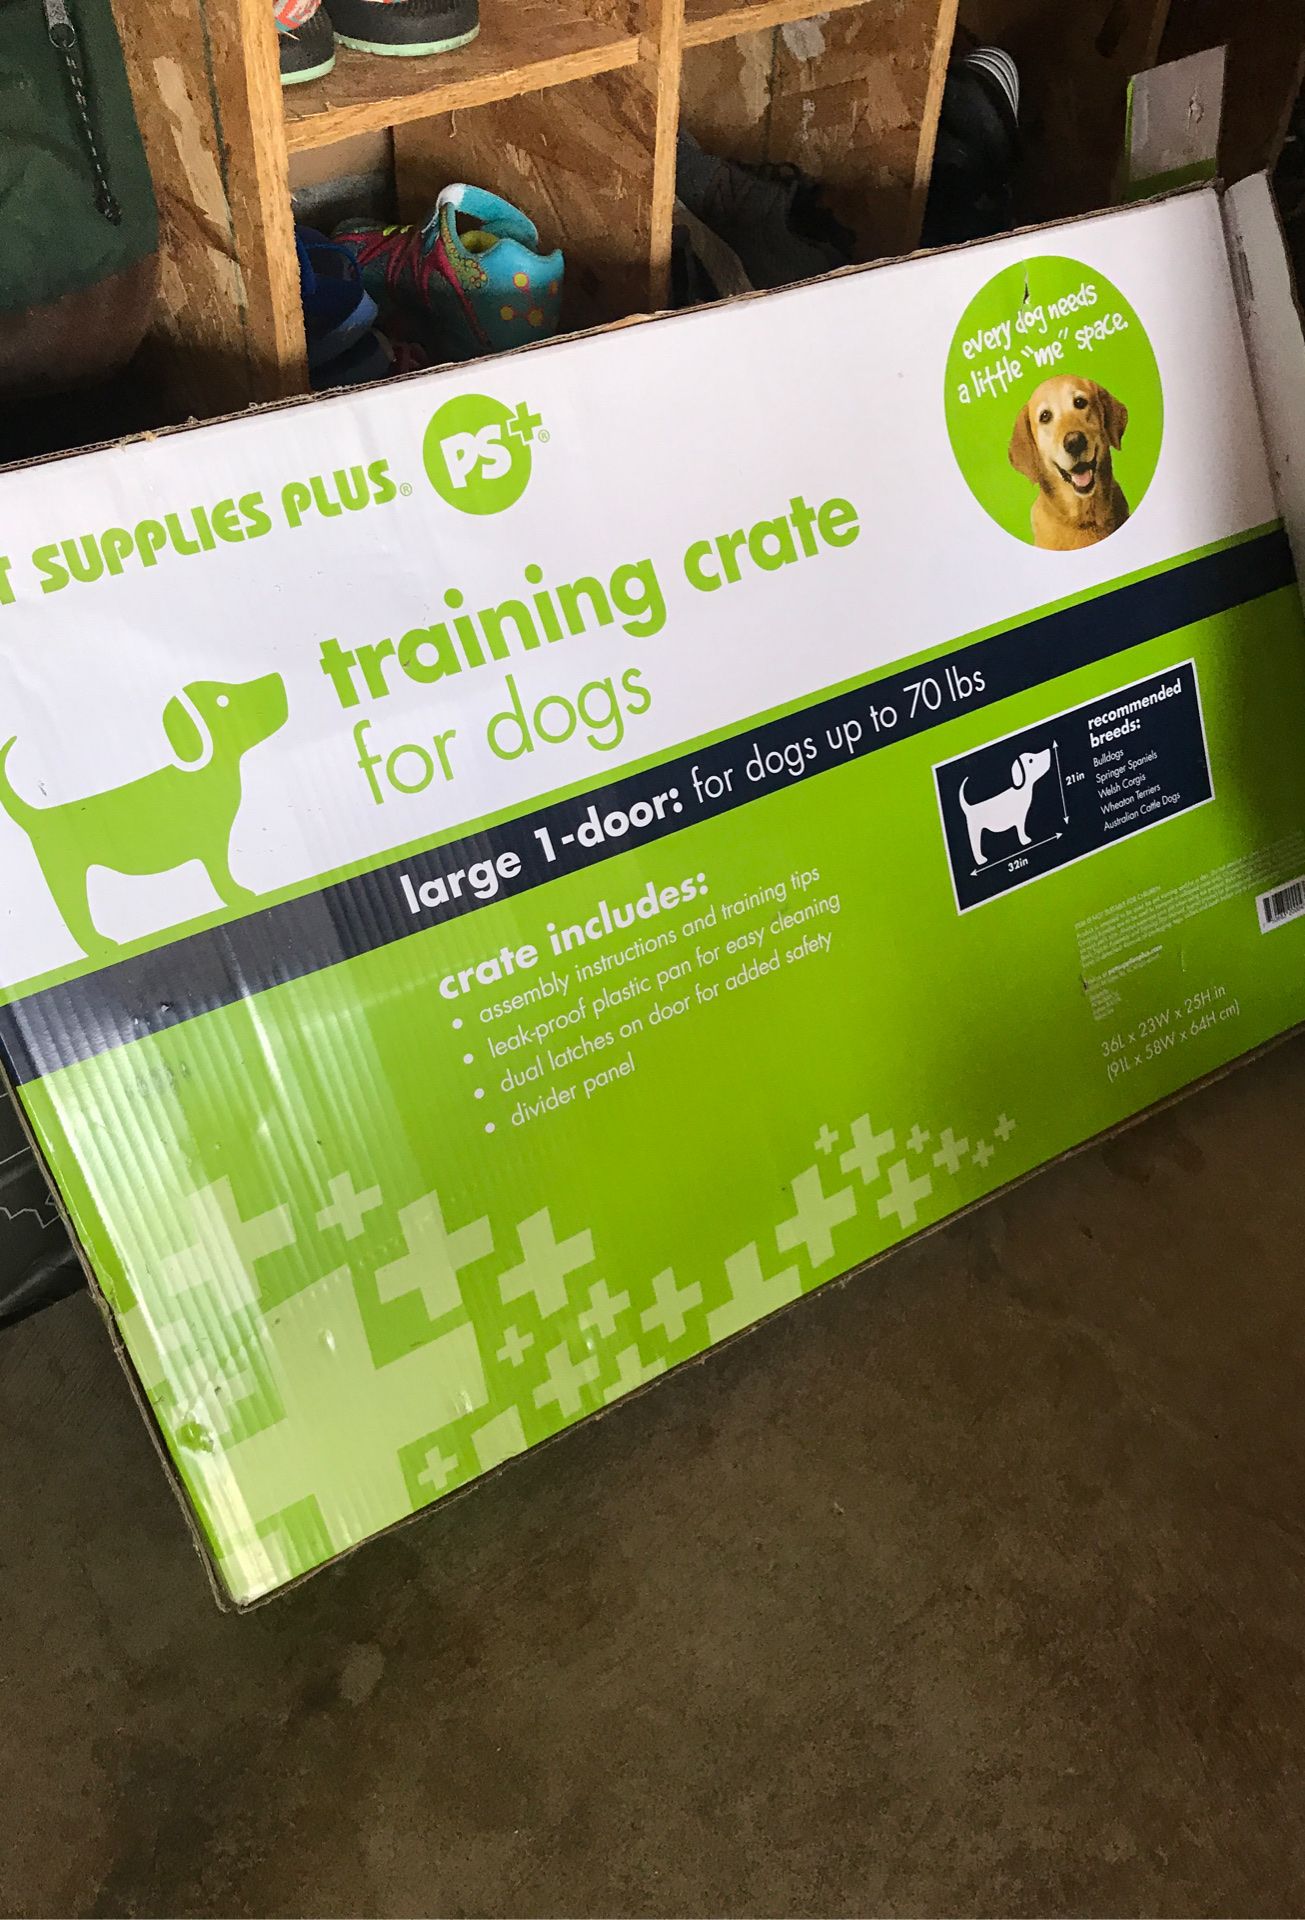 🐶 Training crate for dogs 🐶